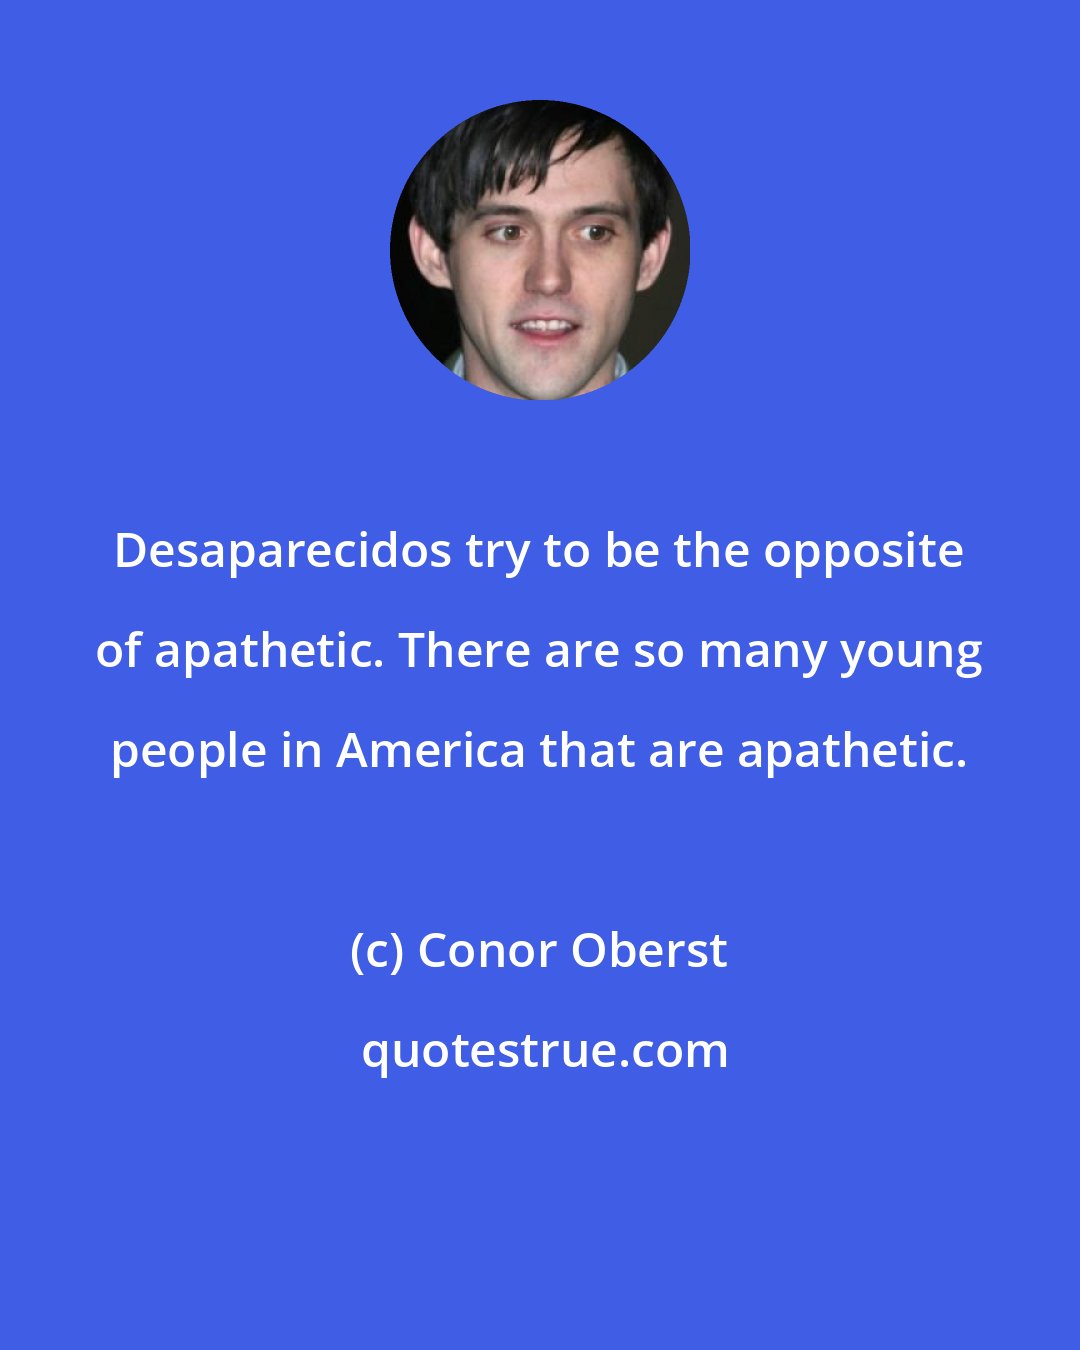 Conor Oberst: Desaparecidos try to be the opposite of apathetic. There are so many young people in America that are apathetic.